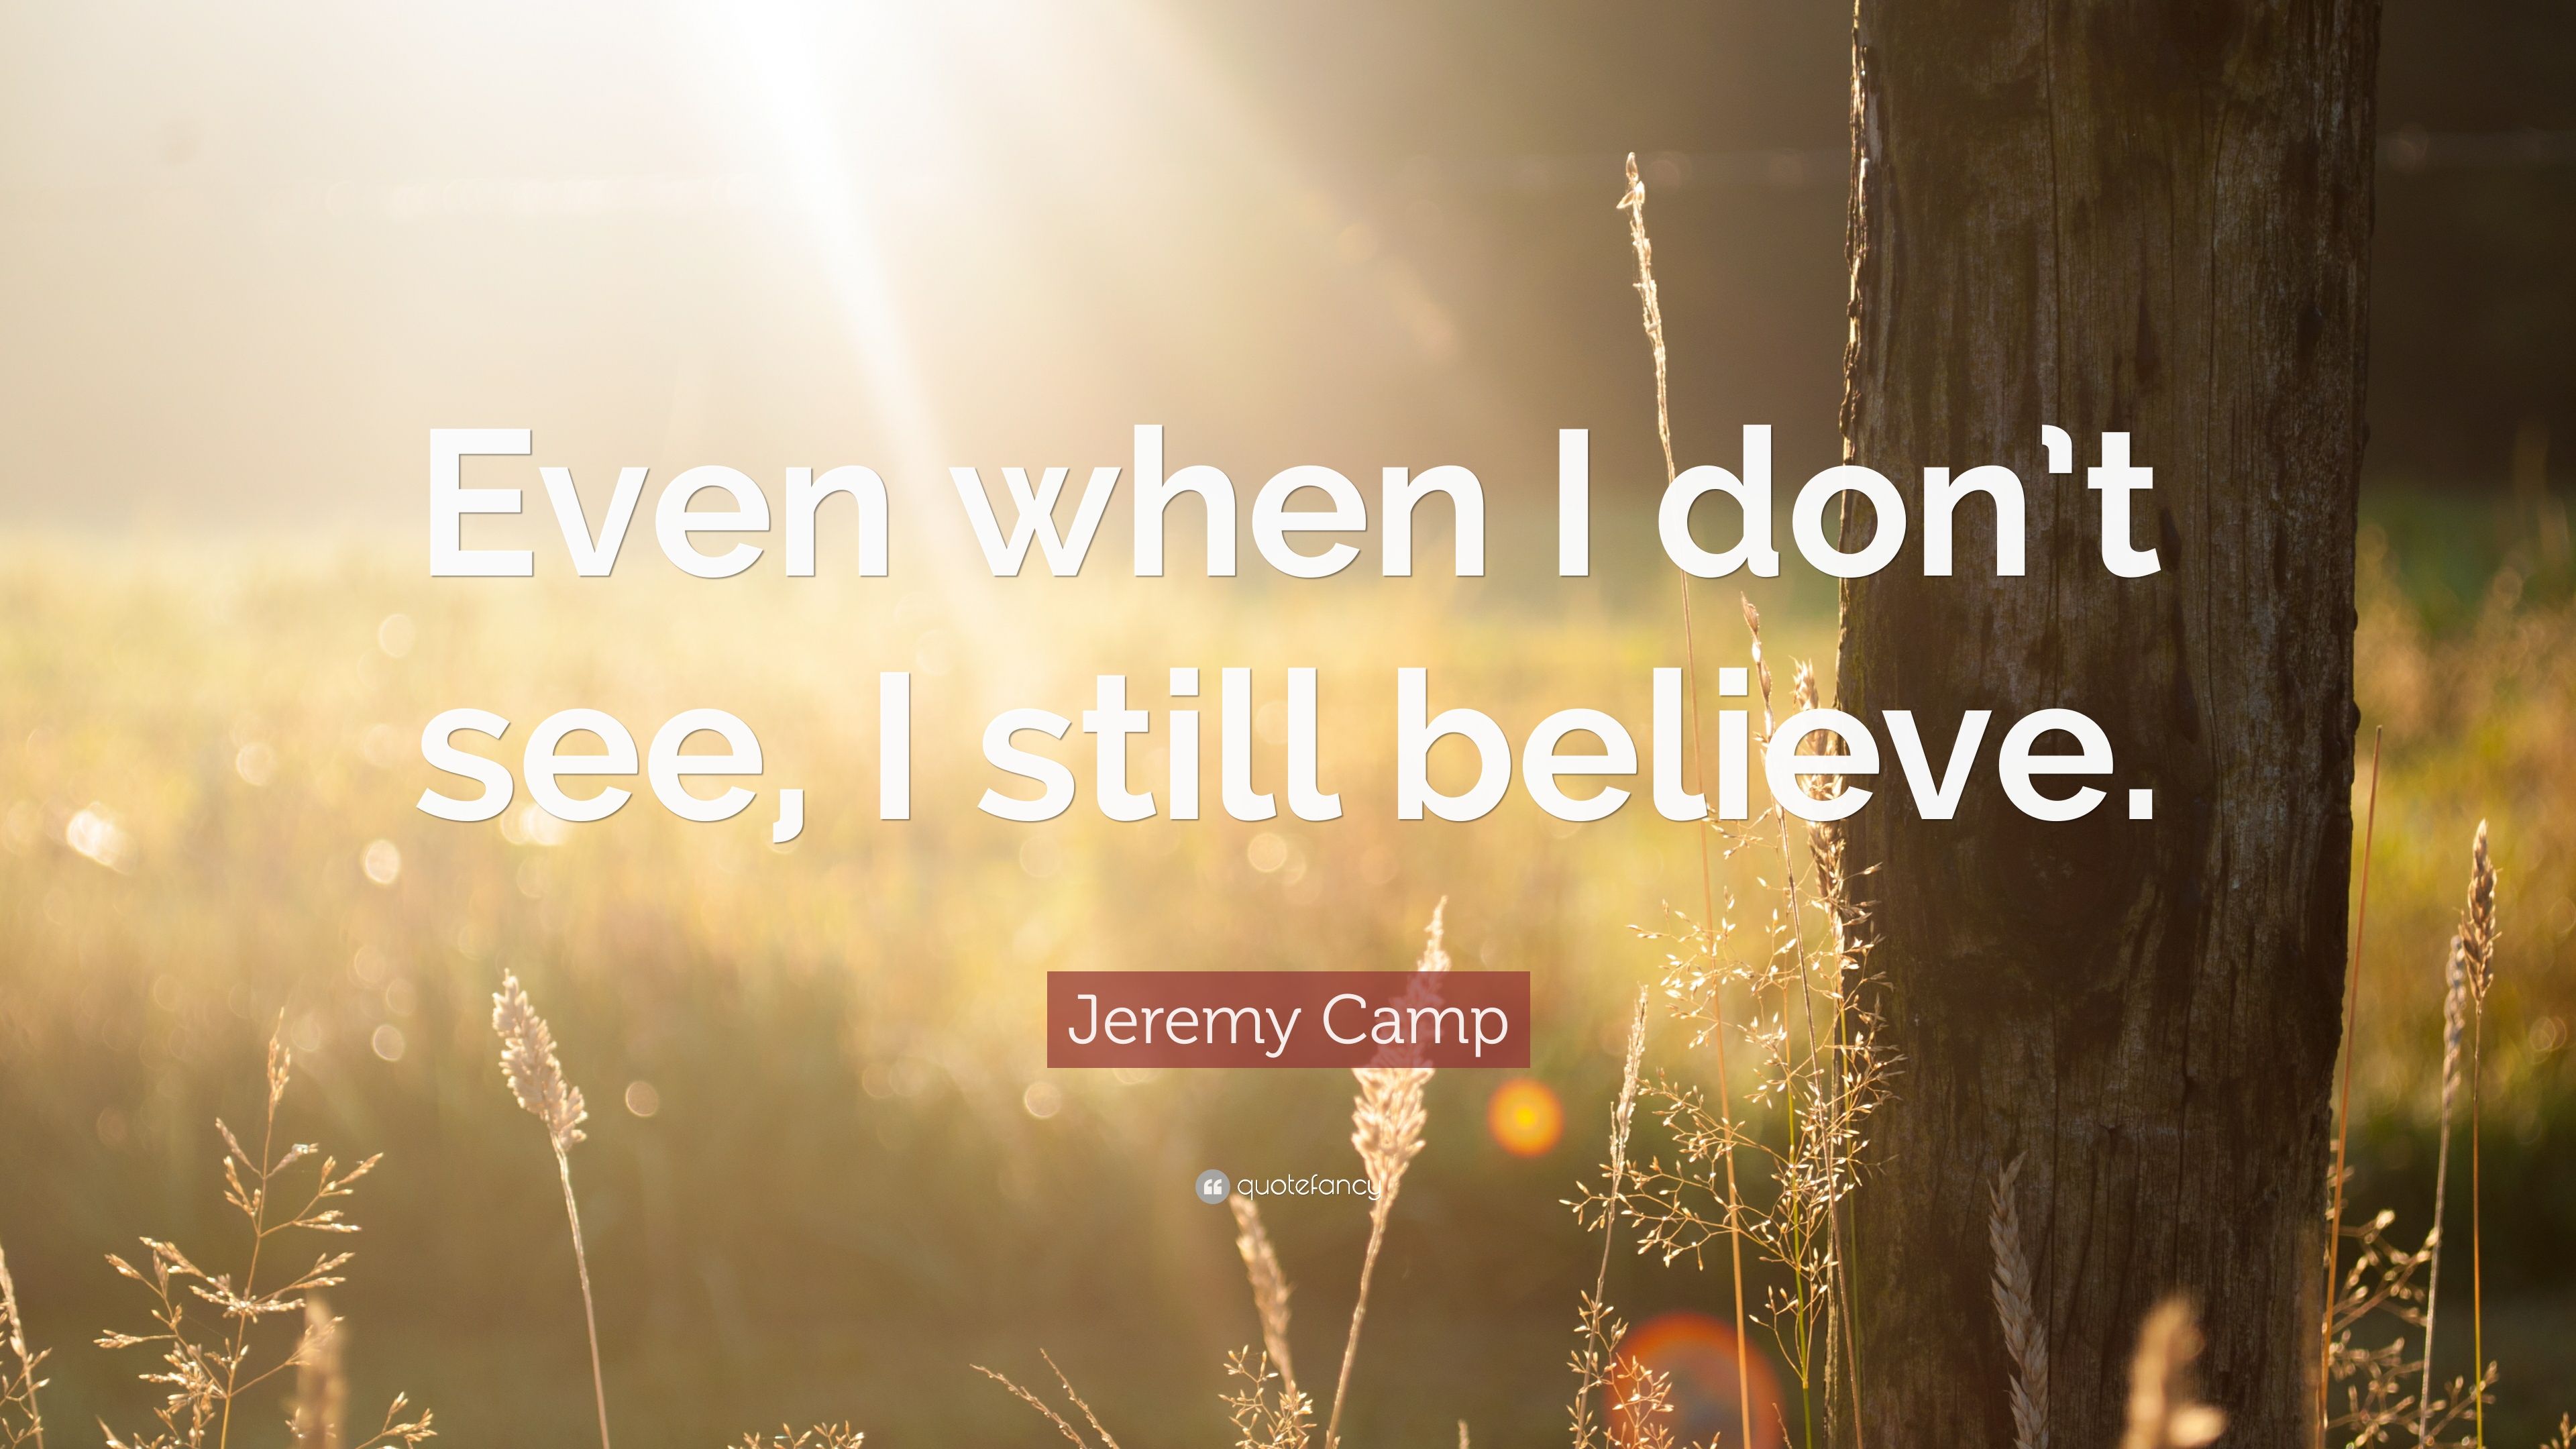 Jeremy Camp Quote: “Even when I don't see, I still believe.” 10